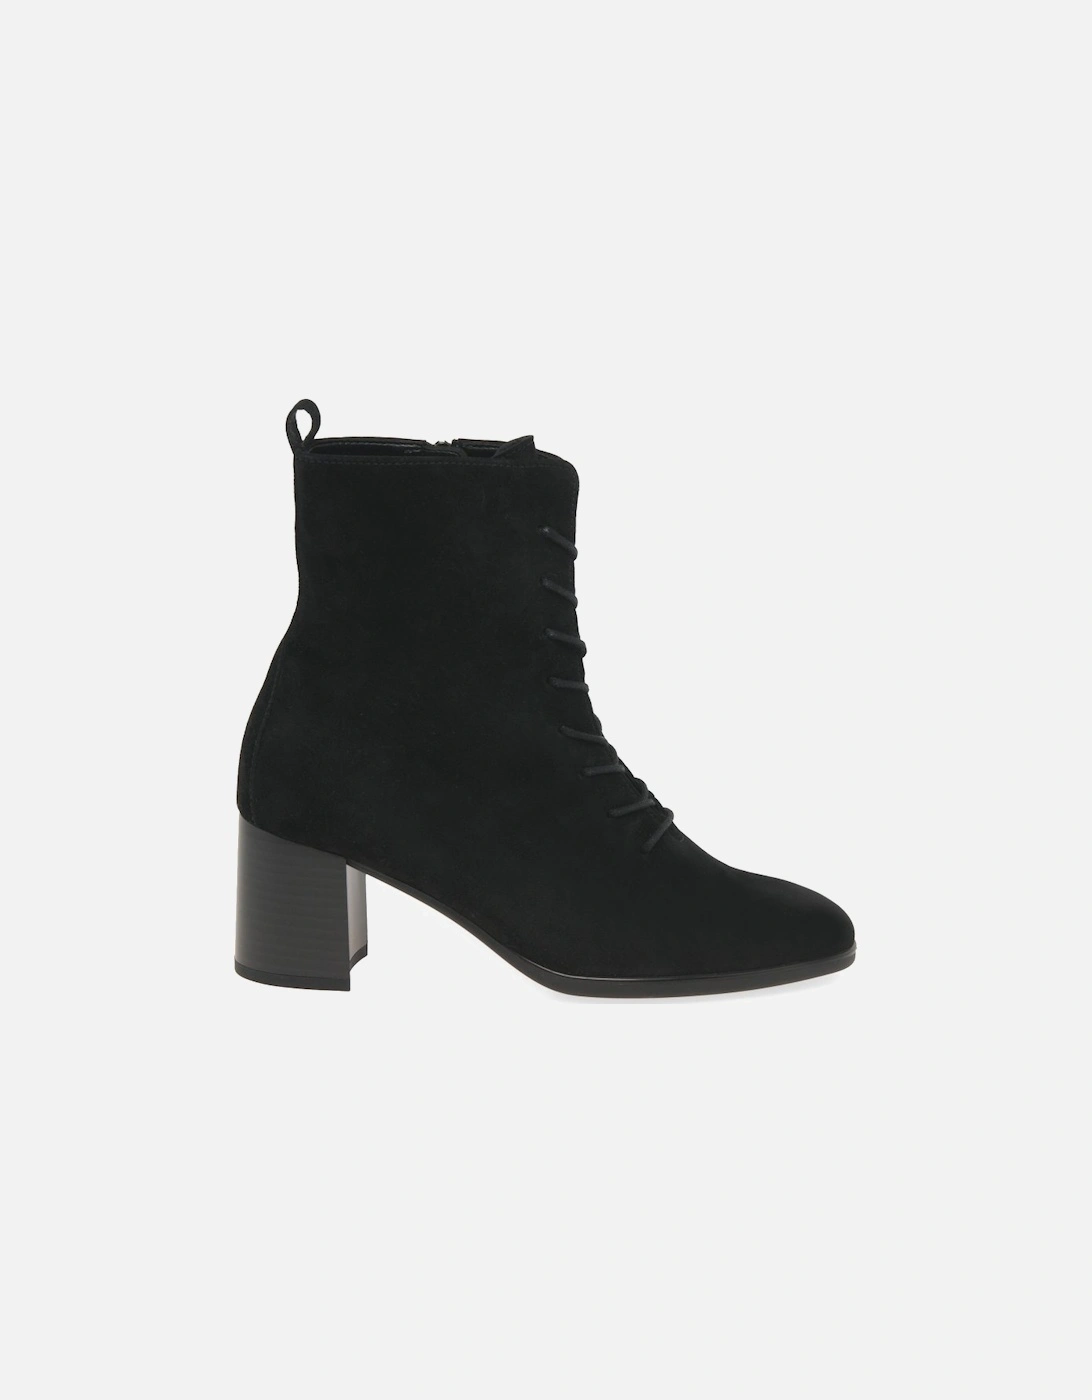 Balfour Womens Ankle Boots